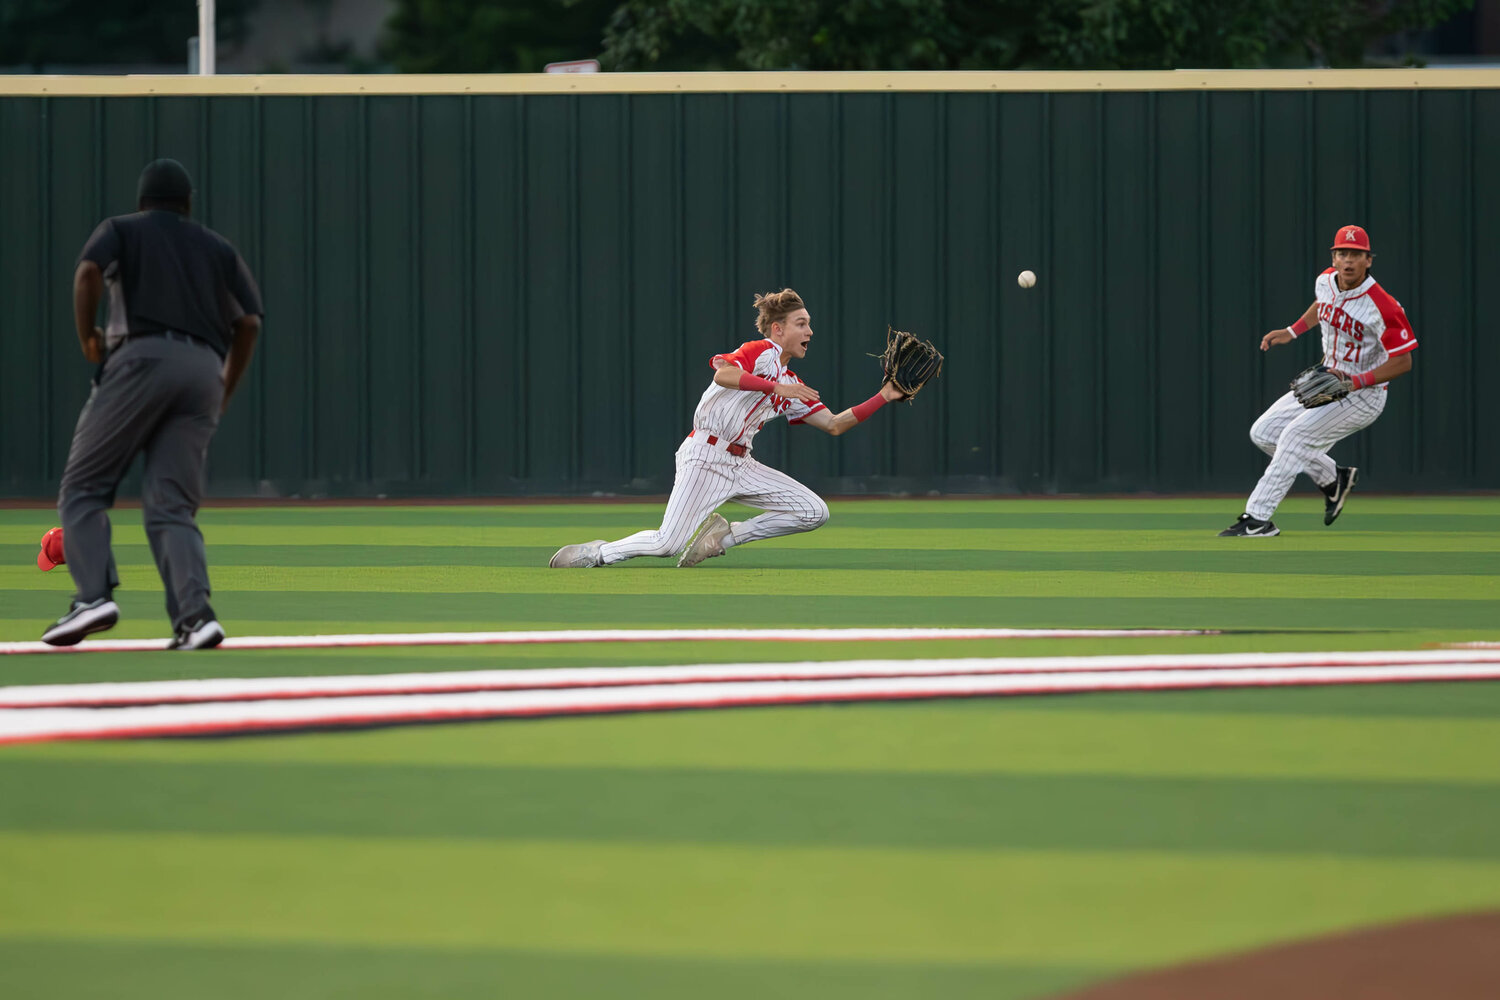 Andrew Hilton makes a diving catch during Thursday's Regional Semifinal between Katy and Clear Springs at Langham Creek.